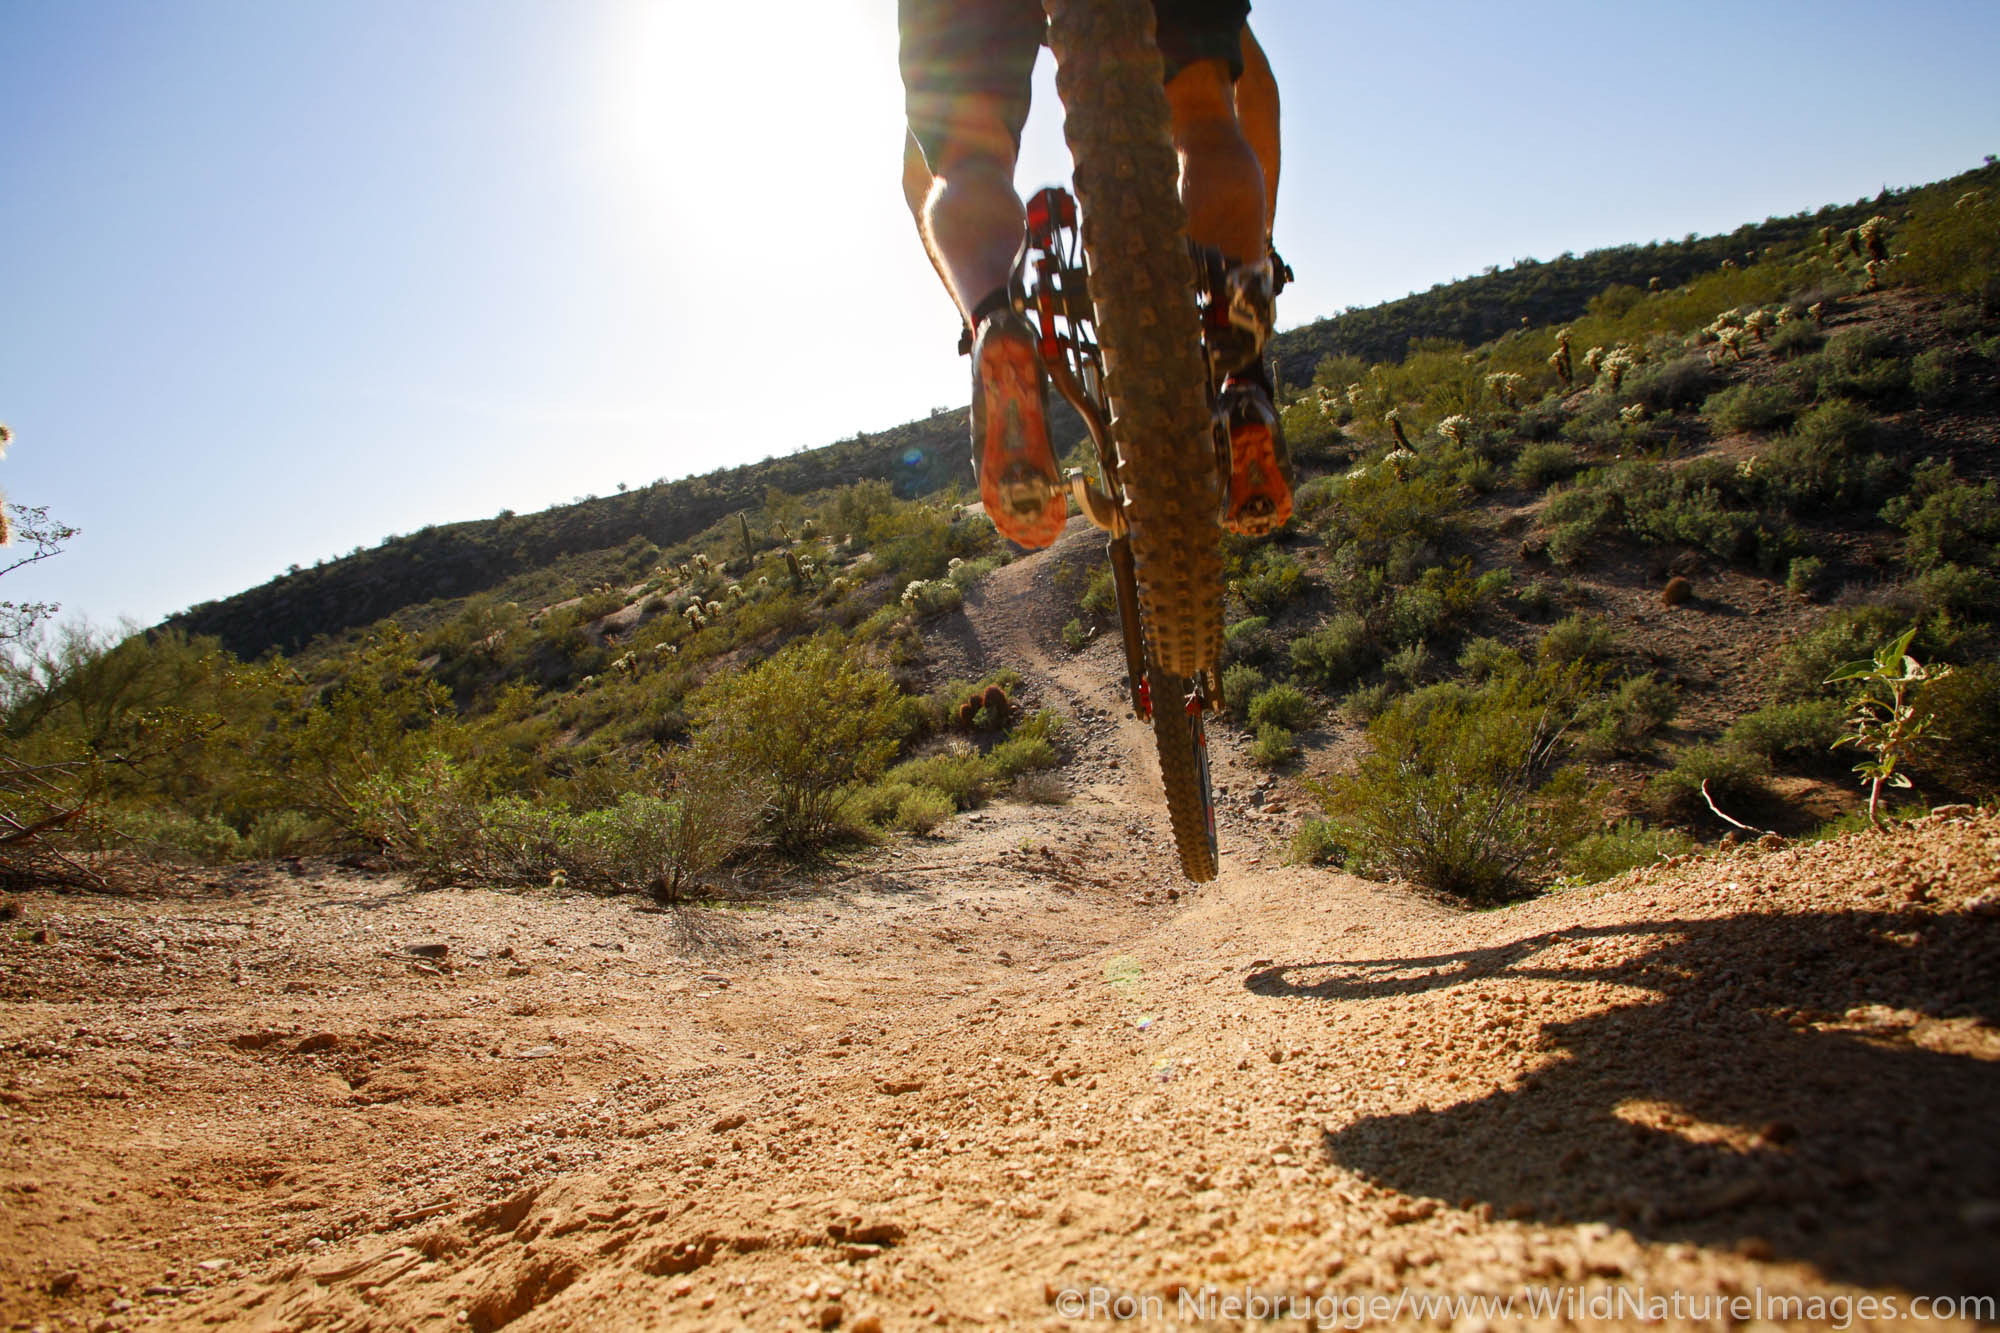 A mountain biker leaps off a ledge on the Technical Loop, one of the competitive race tracks at McDowell Mountain Regional Park...